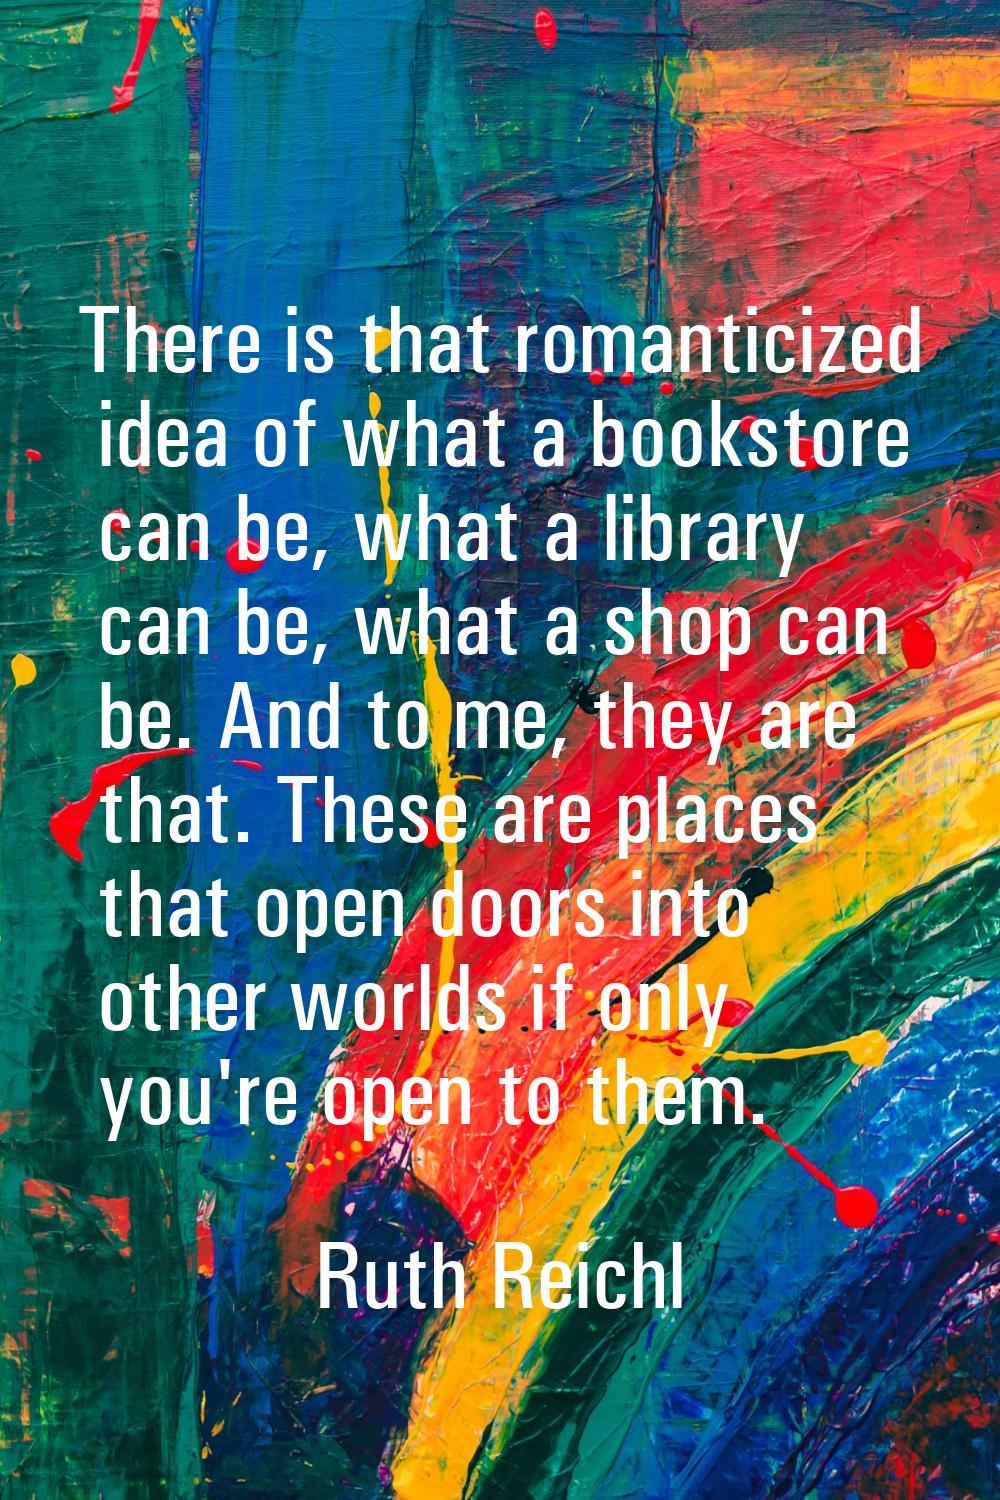 There is that romanticized idea of what a bookstore can be, what a library can be, what a shop can 